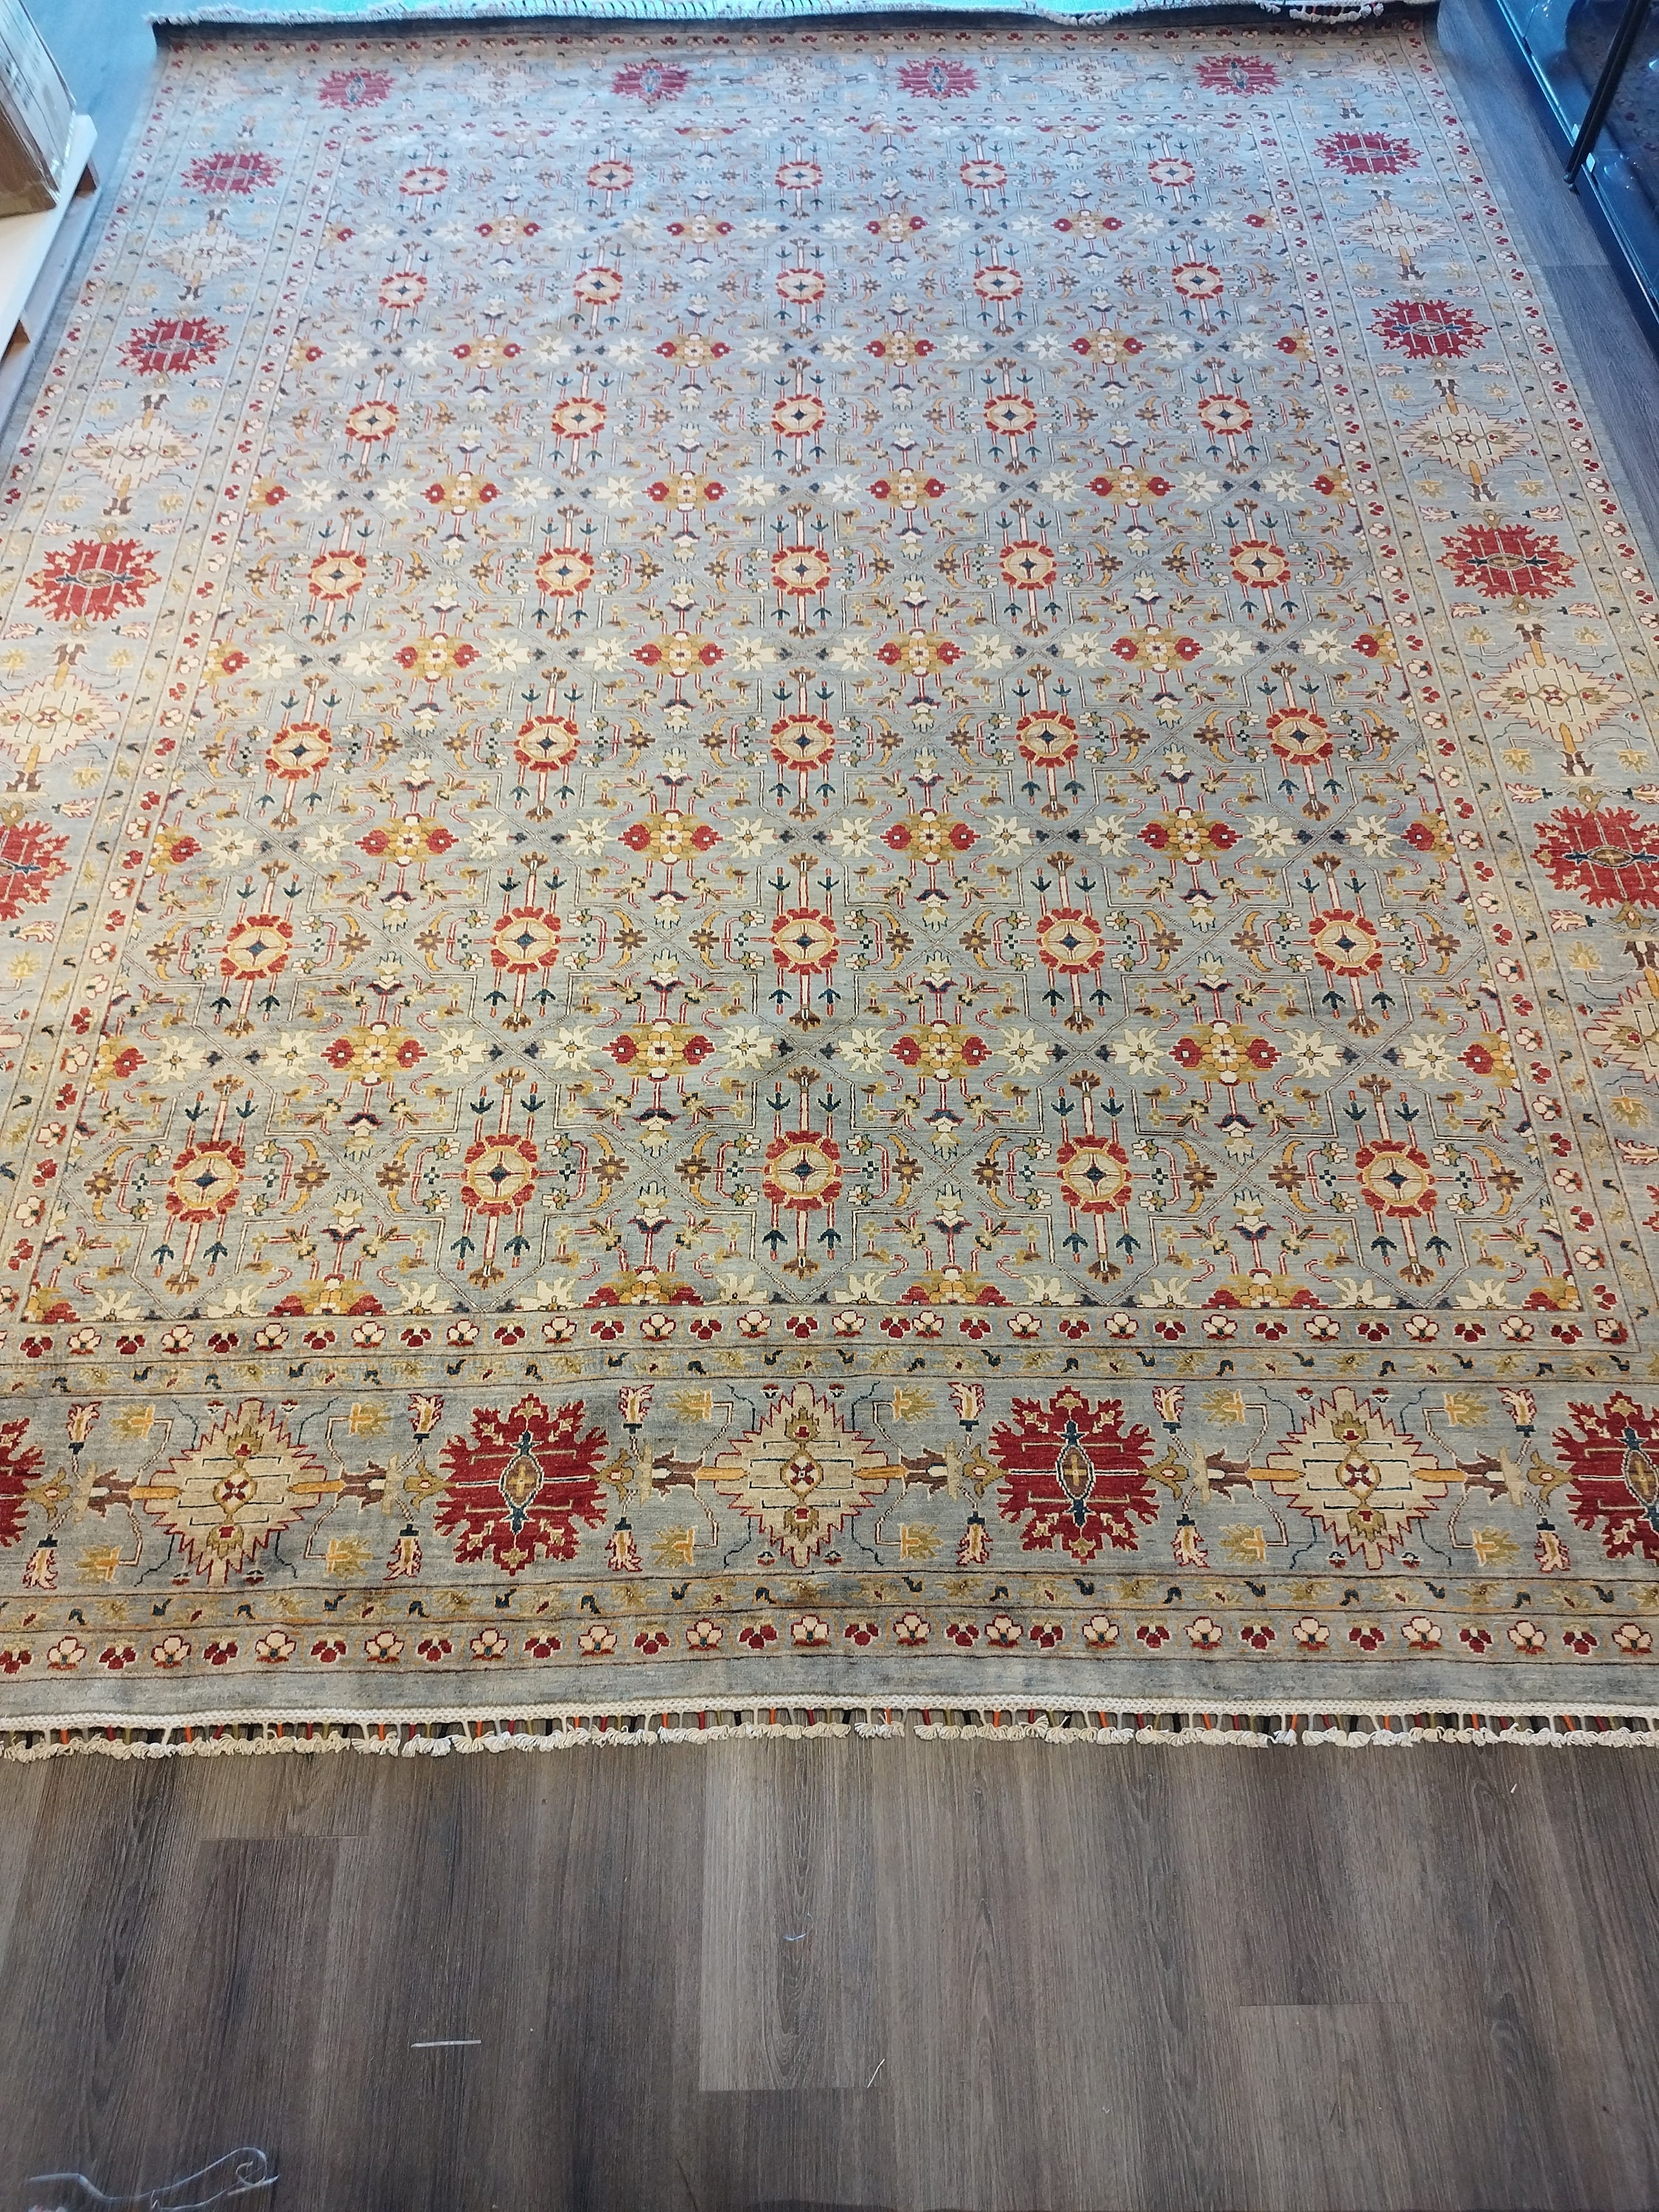 10x13 Beige Chobi Afghan run made in Afghanistan. Extremely high quality wool with a persian design. 100% Handmade Era Carpet